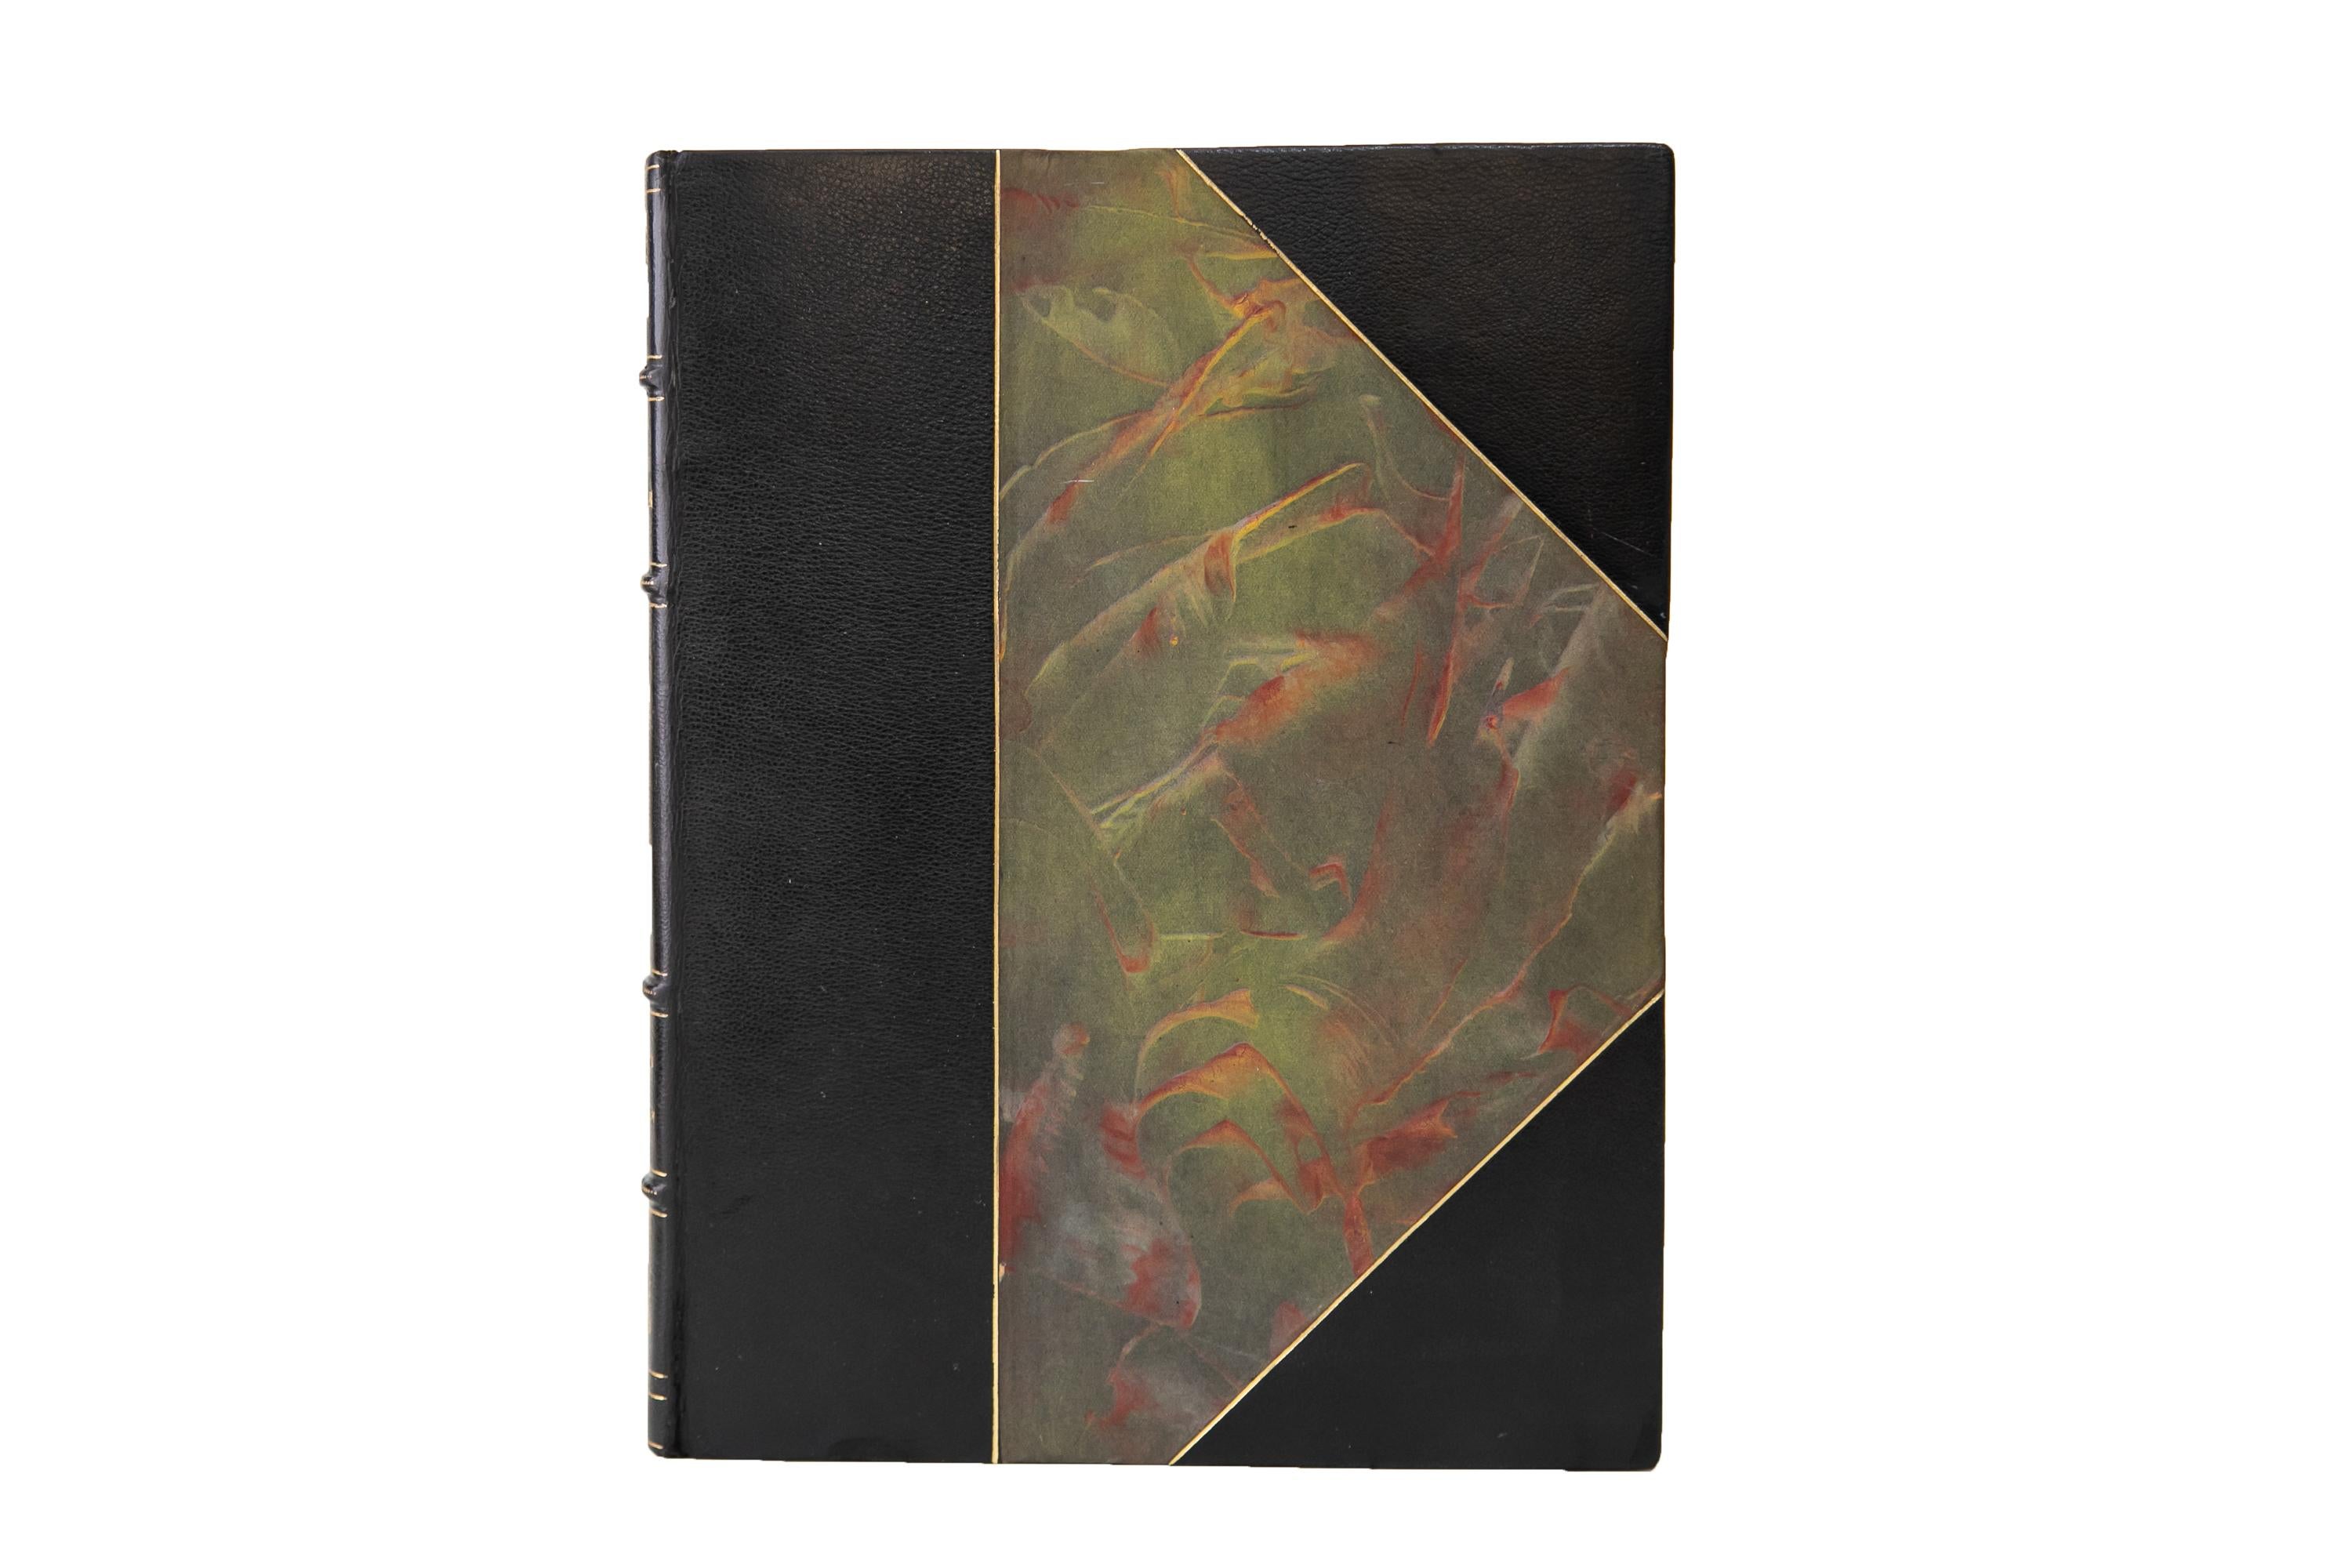 1 Volume. Richard Burton, The Kasîdah of Hâjî Abdû El-Yezdî. Limited Edition. Bound by Bennett in 3/4 black morocco and marbled boards, bordered in gilt-tooling. The spines display raised bands, label lettering, star, and moon details, all